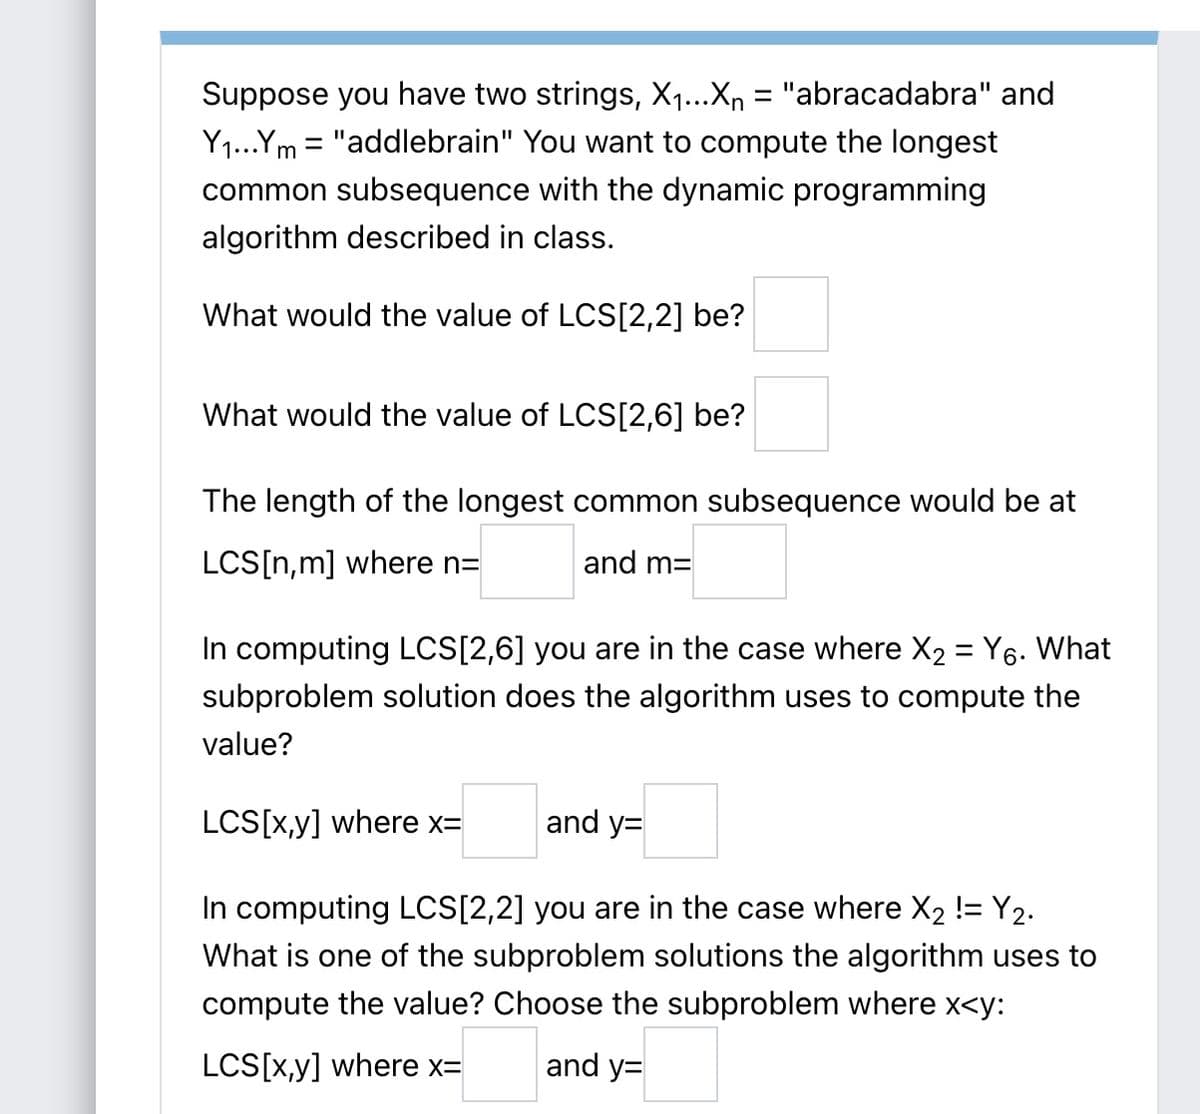 Suppose you have two strings, X1...Xn = "abracadabra" and
Y1...Ym = "addlebrain" You want to compute the longest
common subsequence with the dynamic programming
algorithm described in class.
What would the value of LCS[2,2] be?
What would the value of LCS[2,6] be?
The length of the longest common subsequence would be at
LCS[n,m] where n=
and m=
In computing LCS[2,6] you are in the case where X2 = Y6. What
subproblem solution does the algorithm uses to compute the
value?
LCS[x,y] where x=
and y=
In computing LCS[2,2] you are in the case where X2 != Y2.
What is one of the subproblem solutions the algorithm uses to
compute the value? Choose the subproblem where x<y:
LCS[x,y] where x=
and y=
